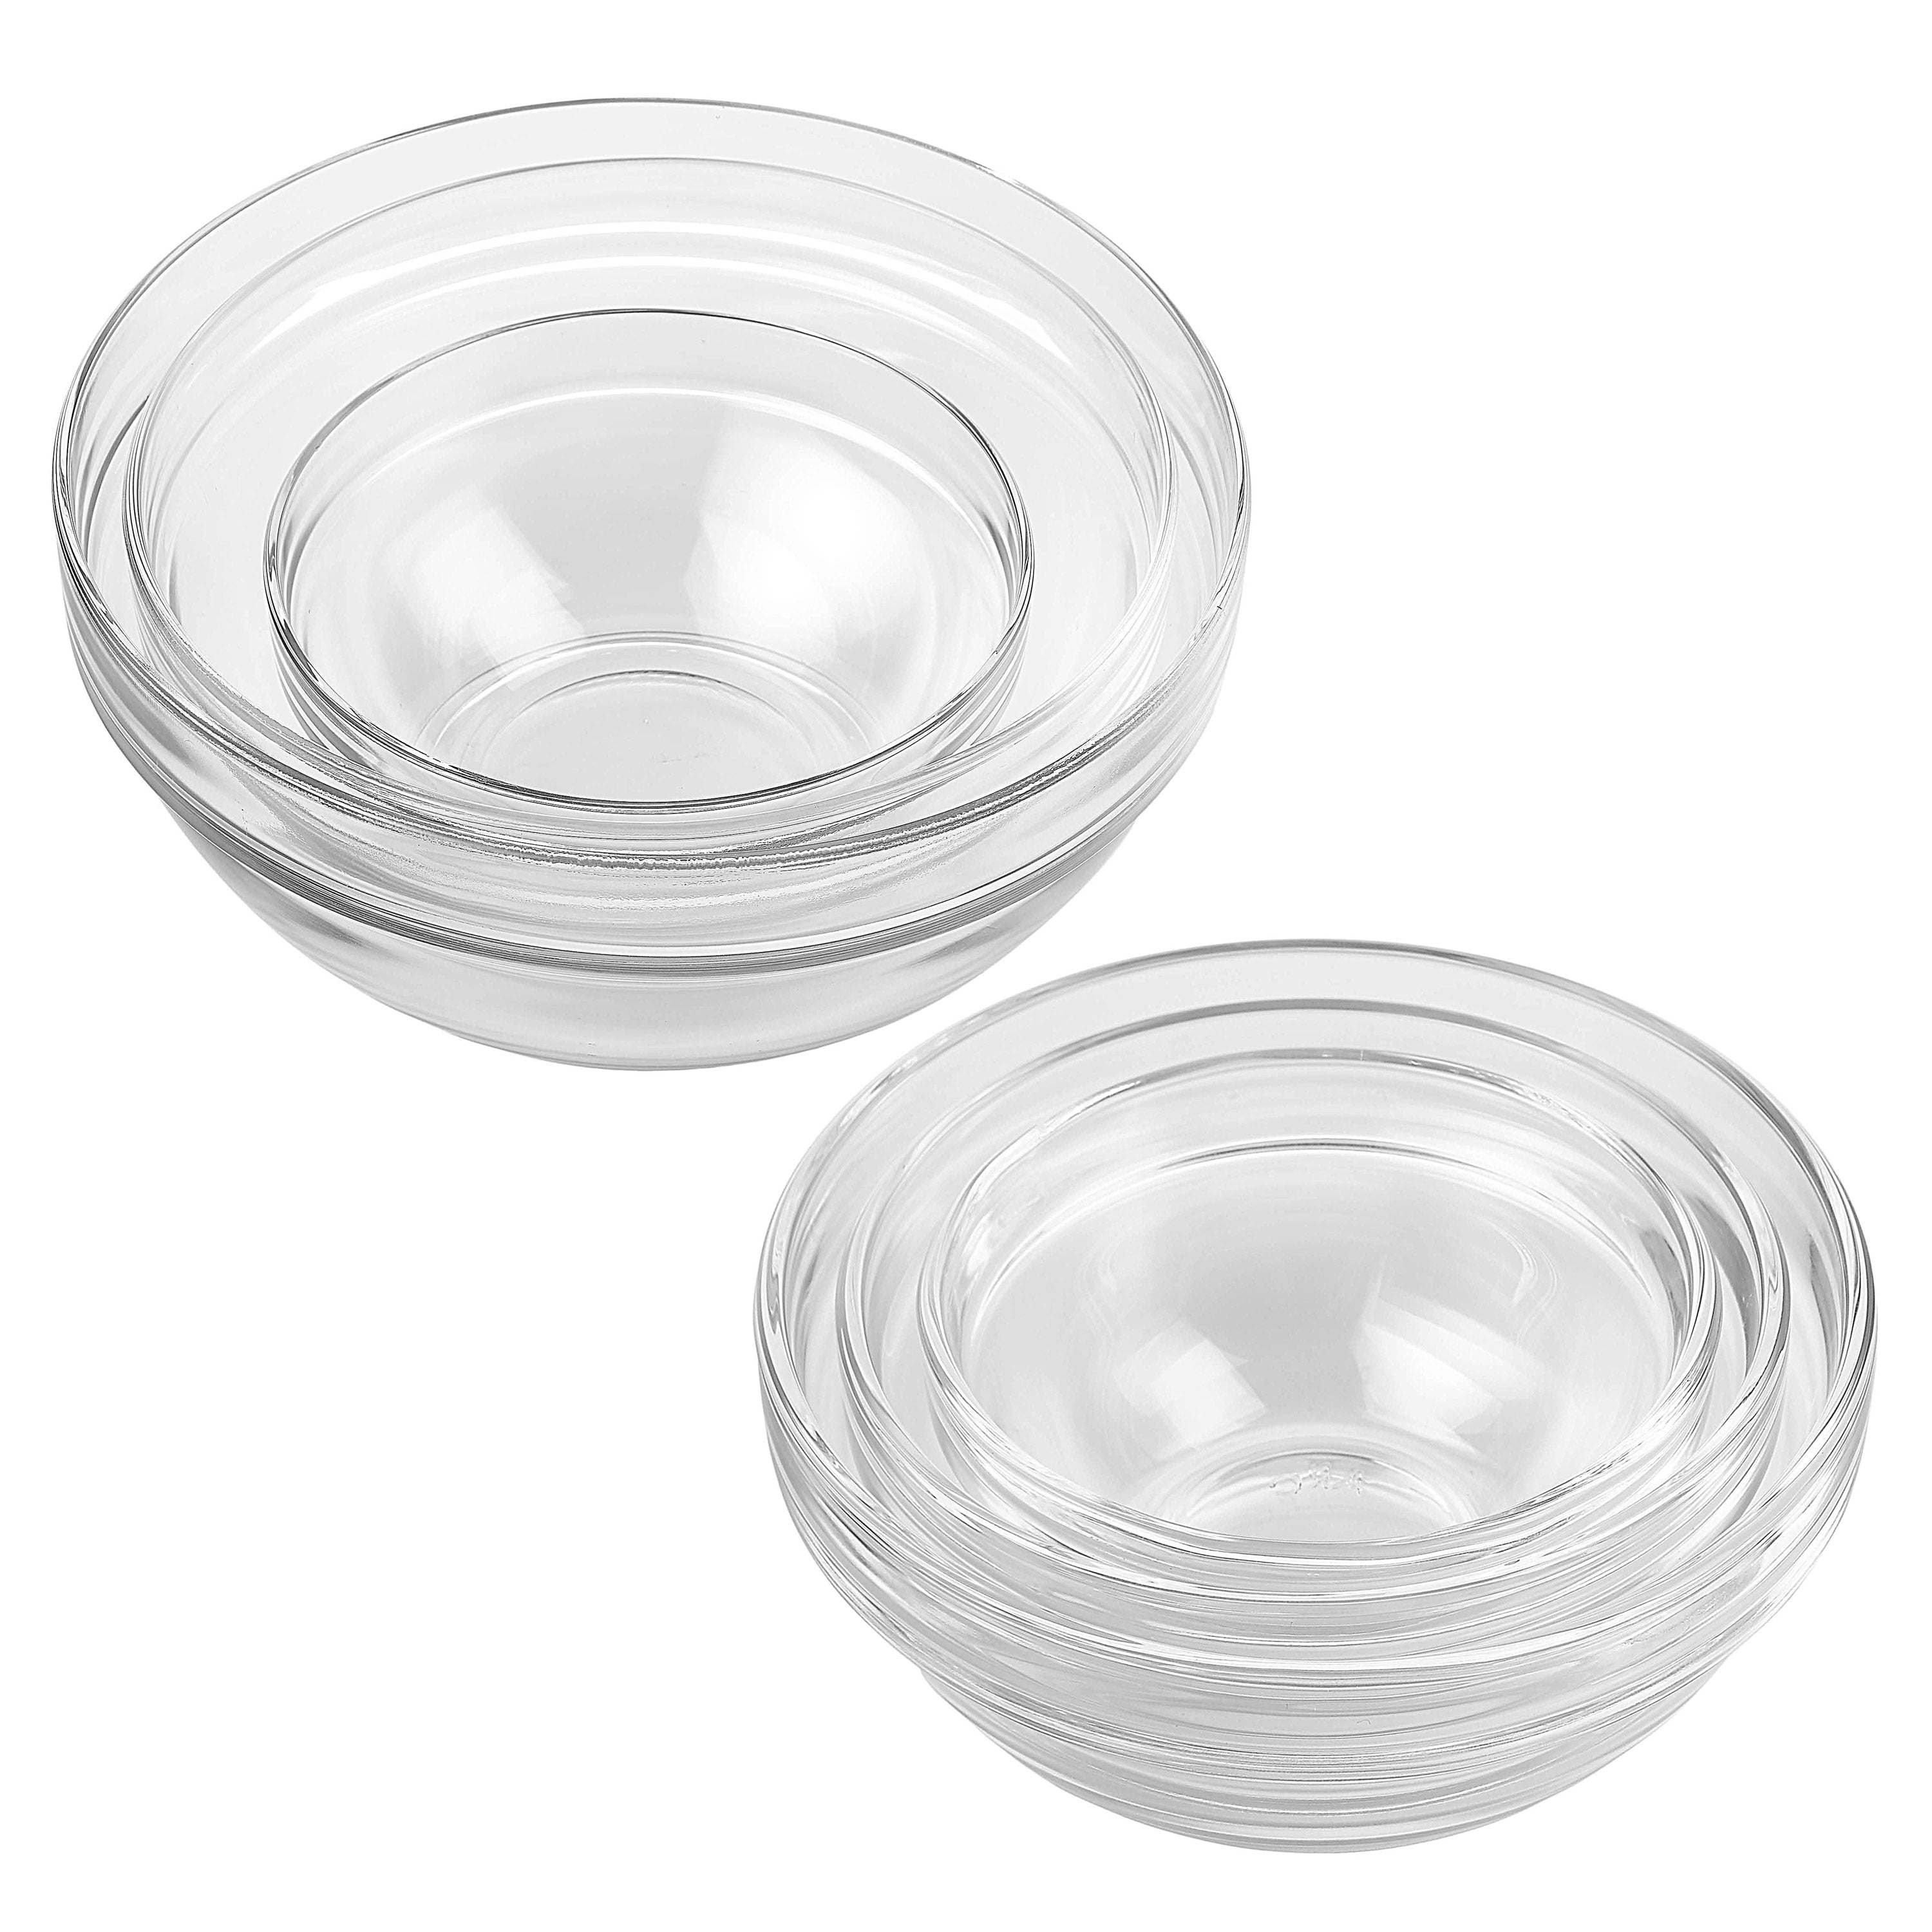 Lawei Set of 9 Glass Mixing Bowls - Glass Nesting Bowls Glass Prep Bowls  Clear Glass Salad Bowls for Kitchen Prep Salad, Cereal, Ice Cream, Pasta